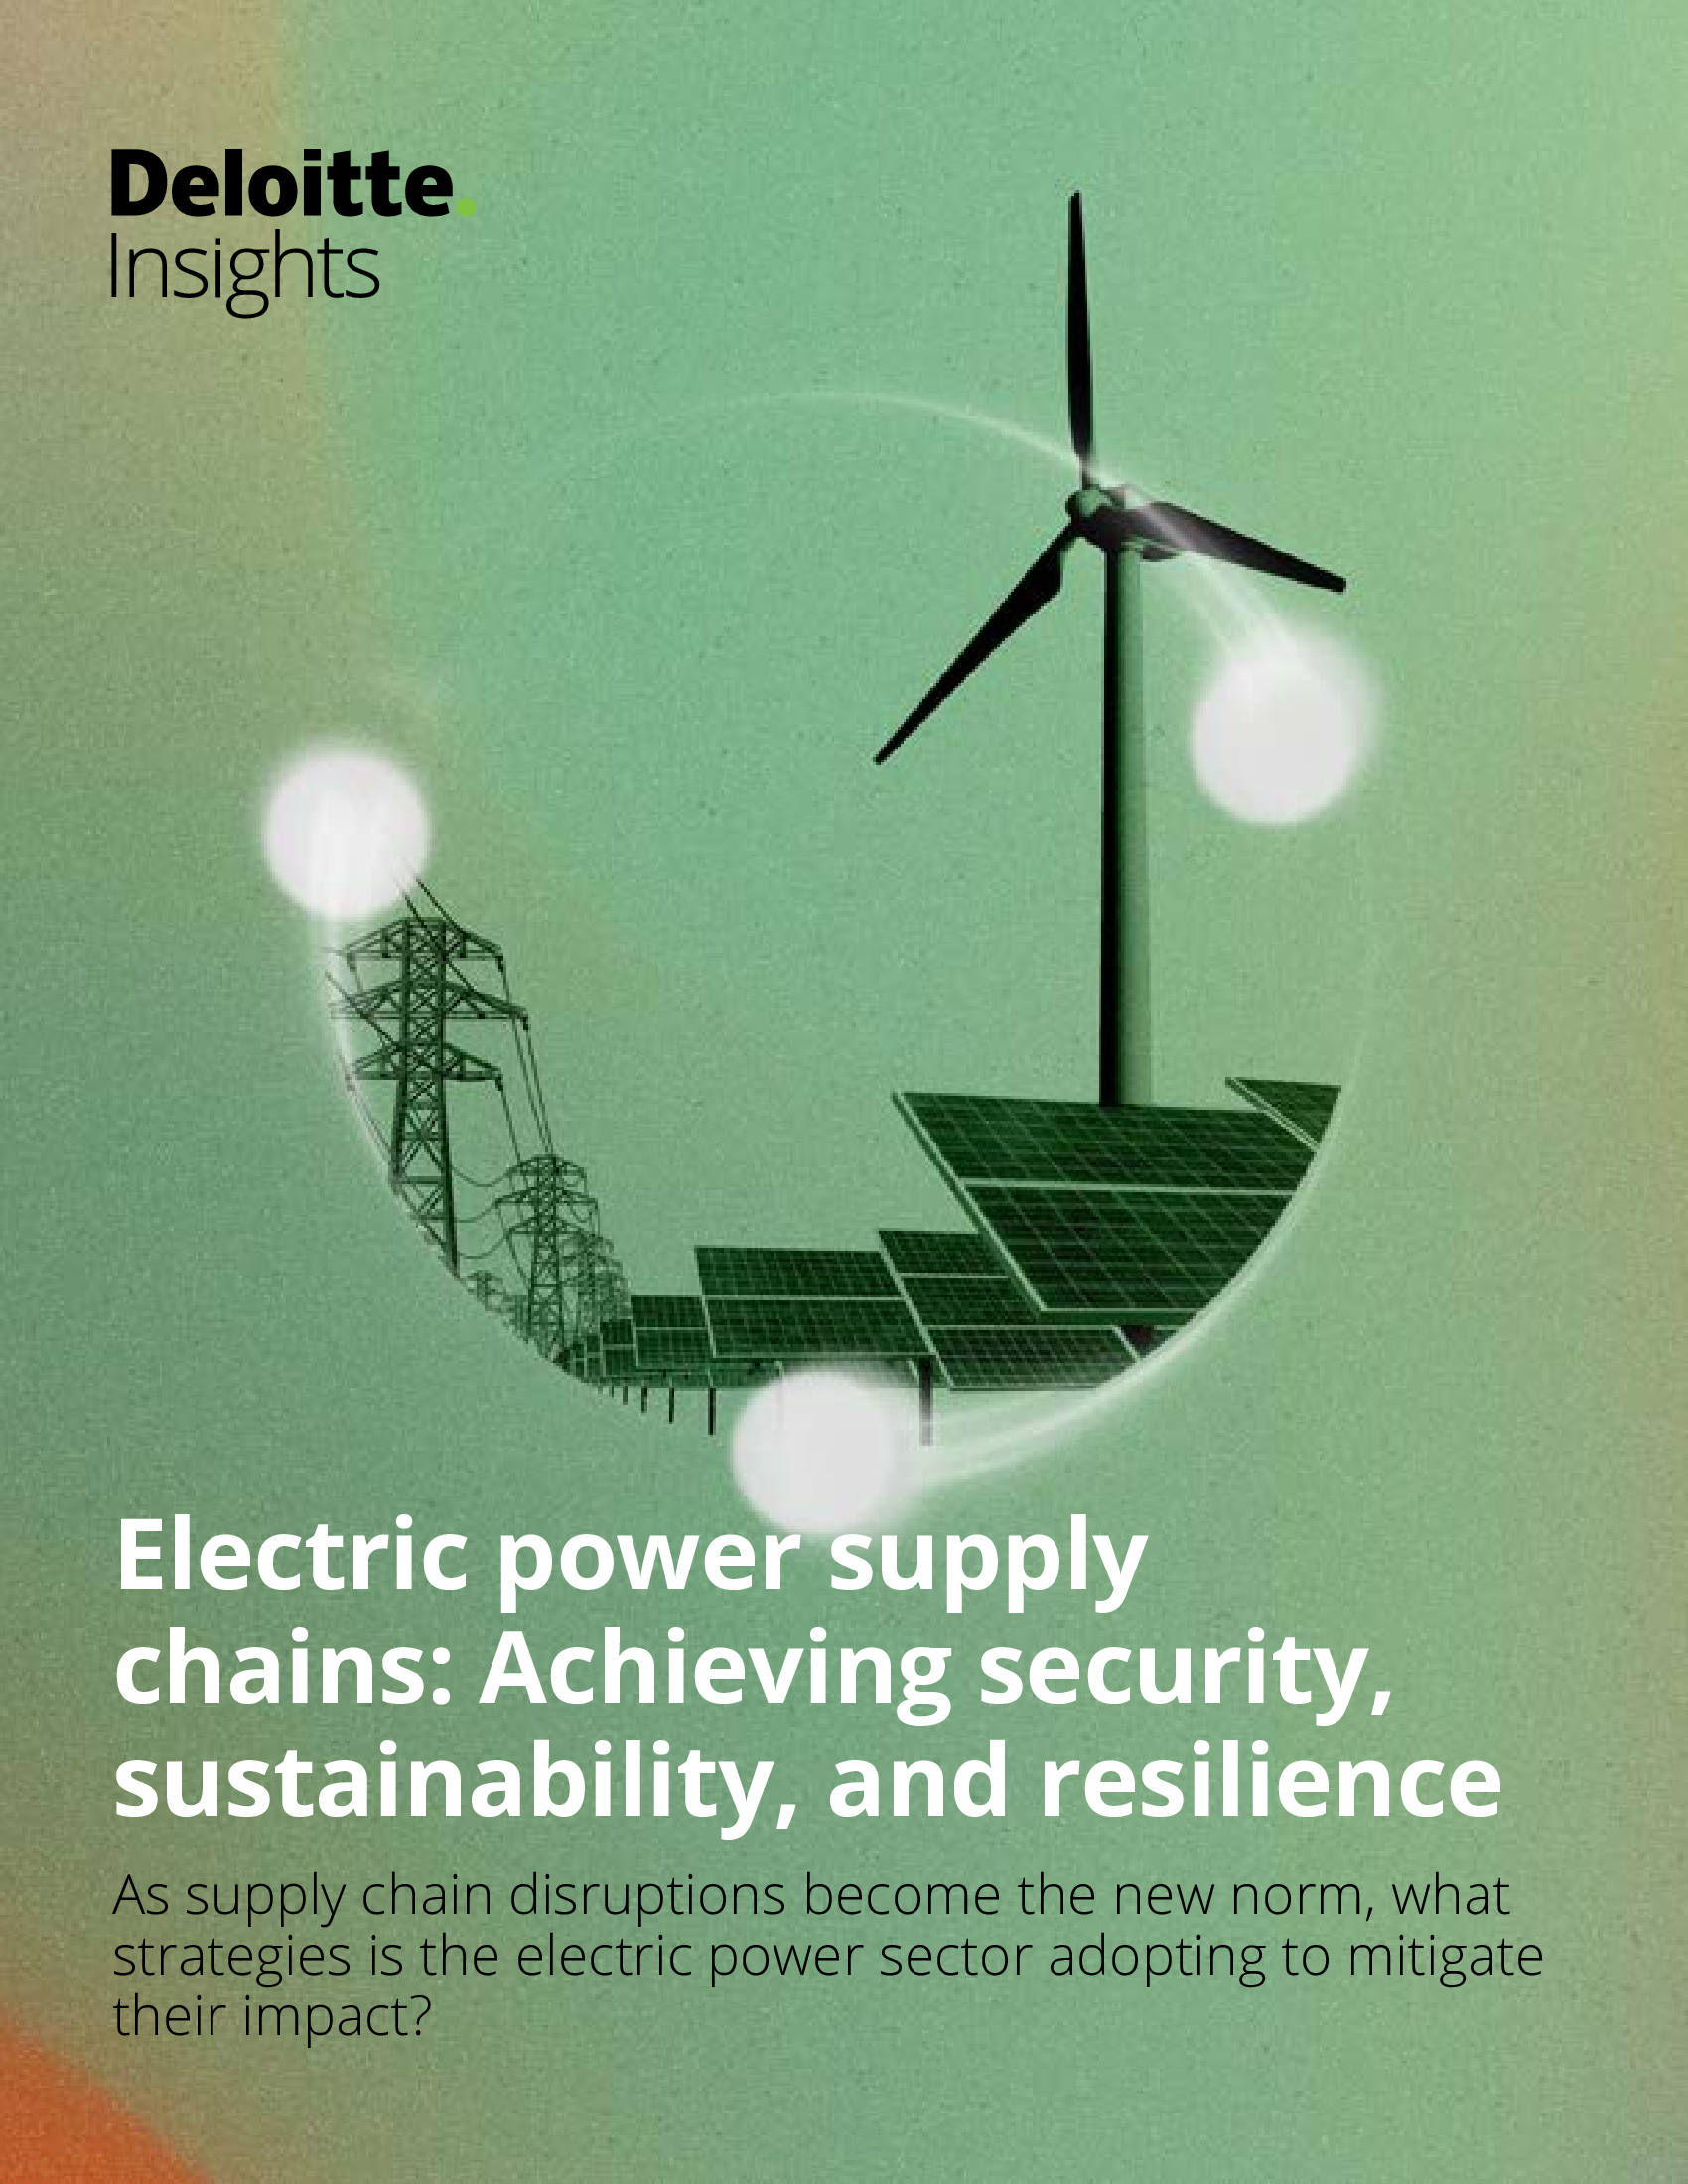 Deloitte Report 'Electric Power Supply Chains Achieving Security